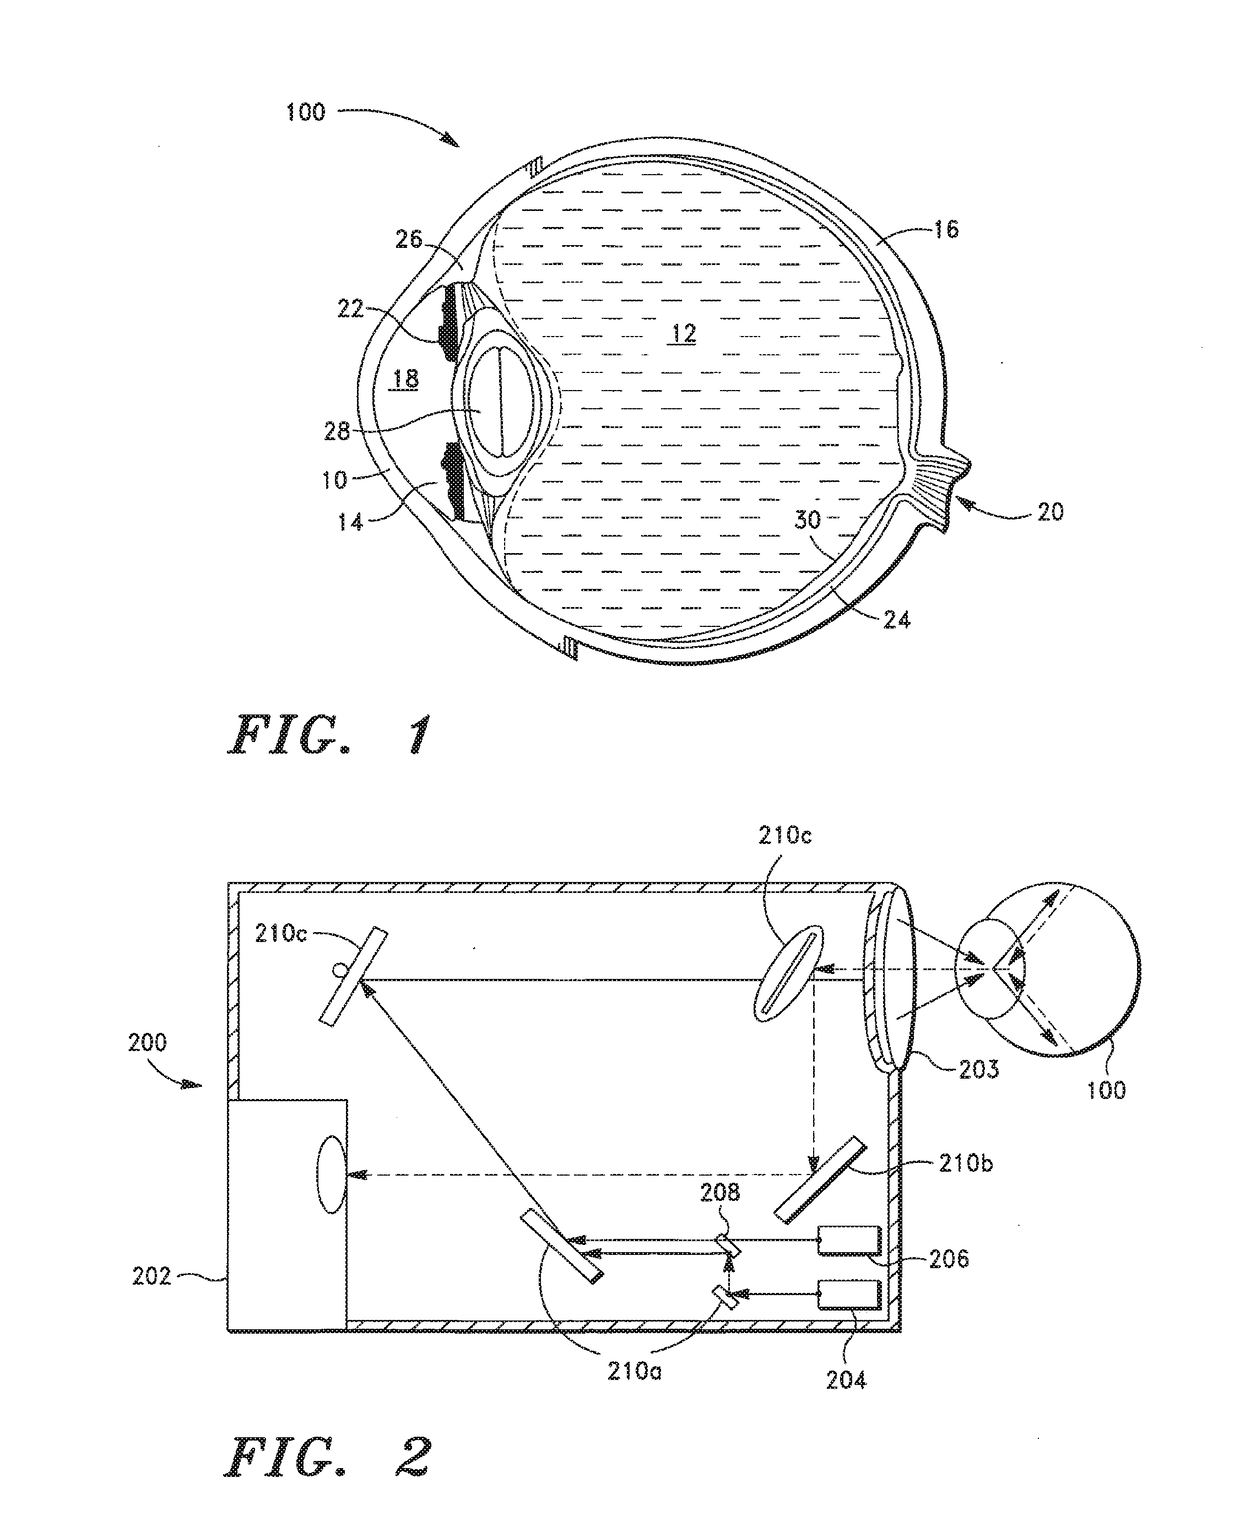 Remote Laser Treatment System With Dynamic Imaging